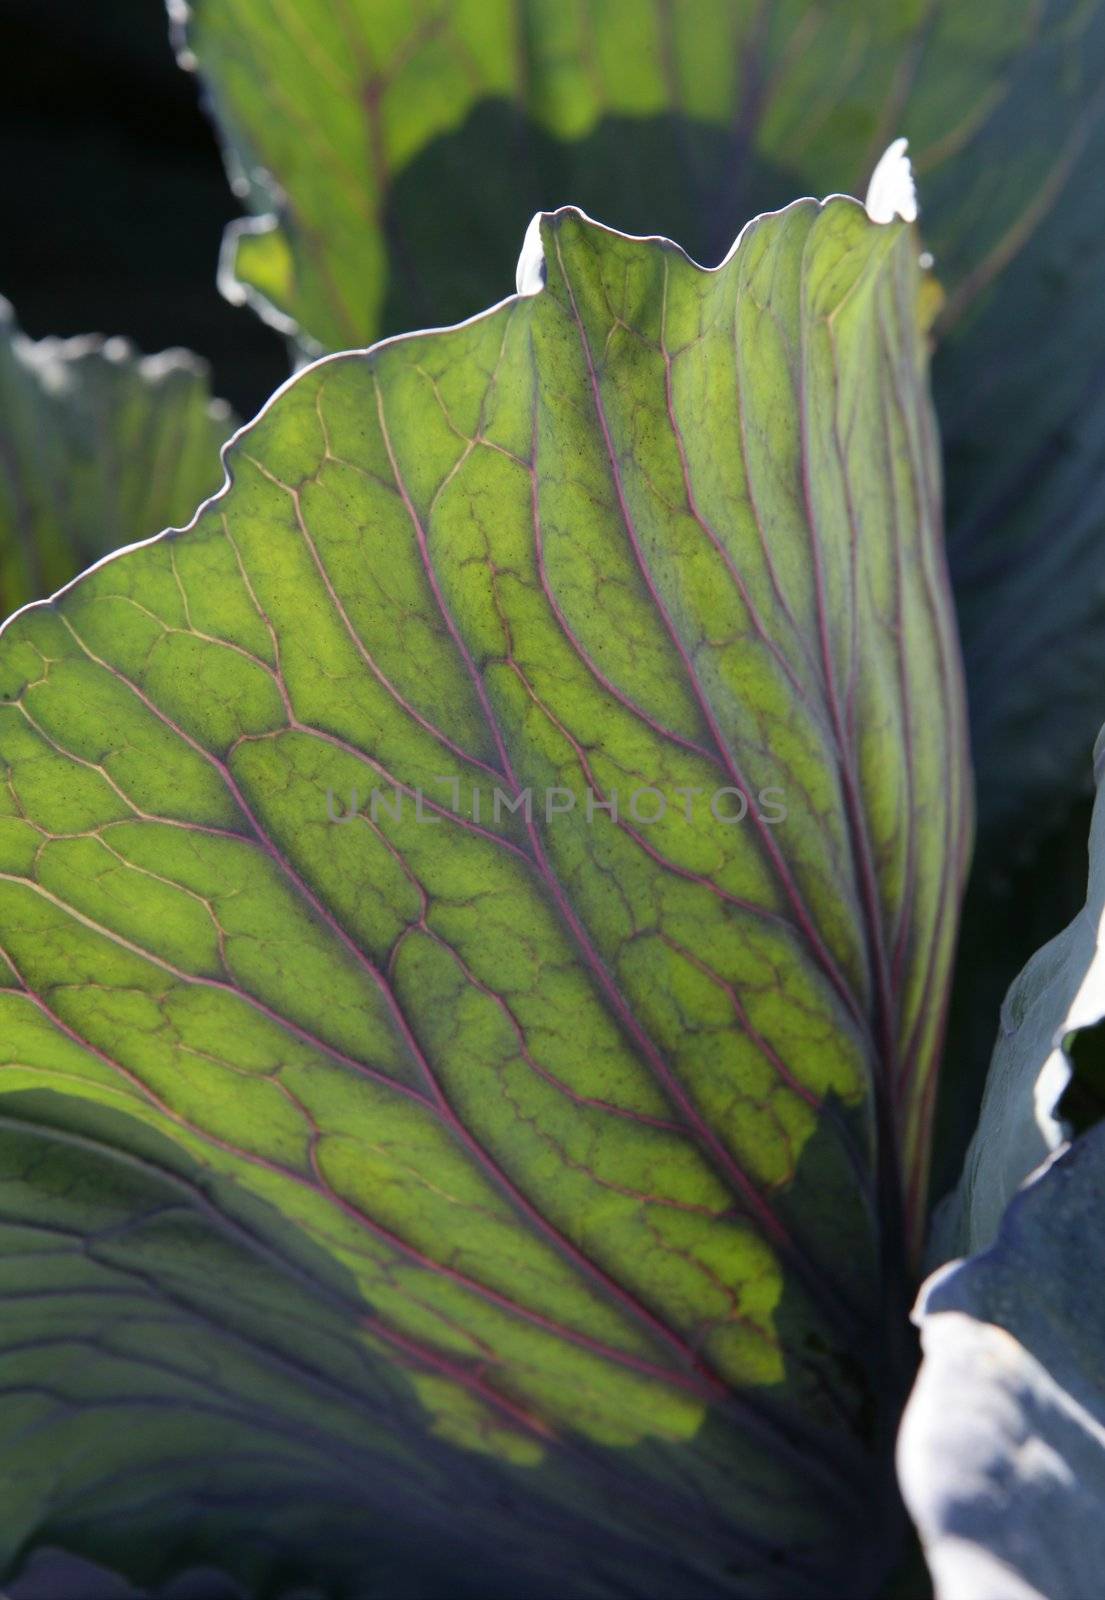 Agriculture in Spain, cabbage leaf macro detail by lunamarina